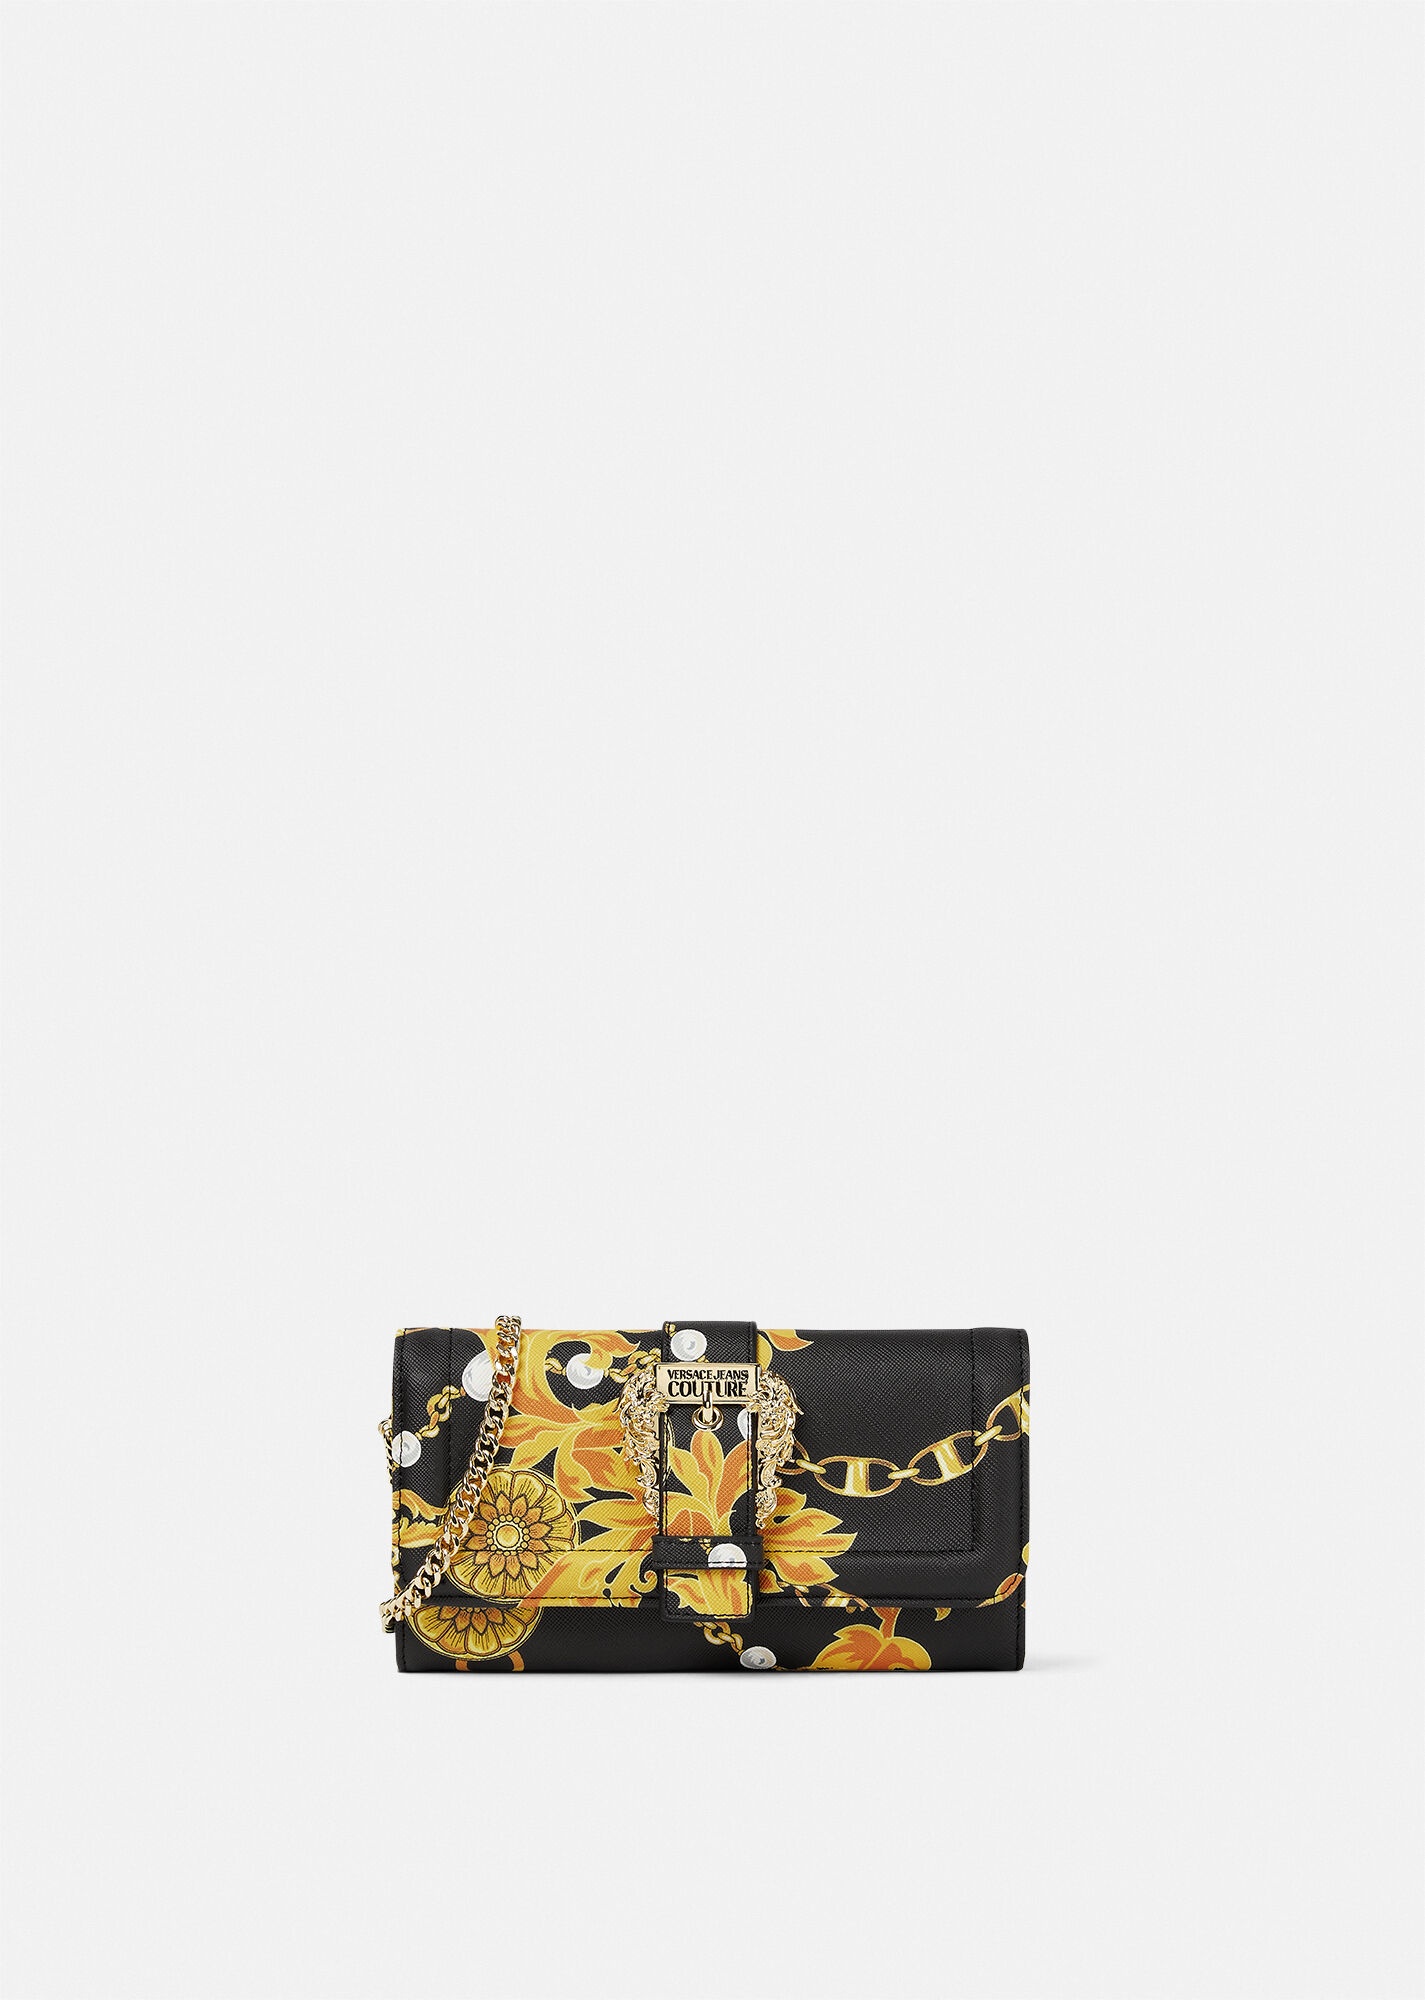 Chain Couture Couture1 Clutch - 1